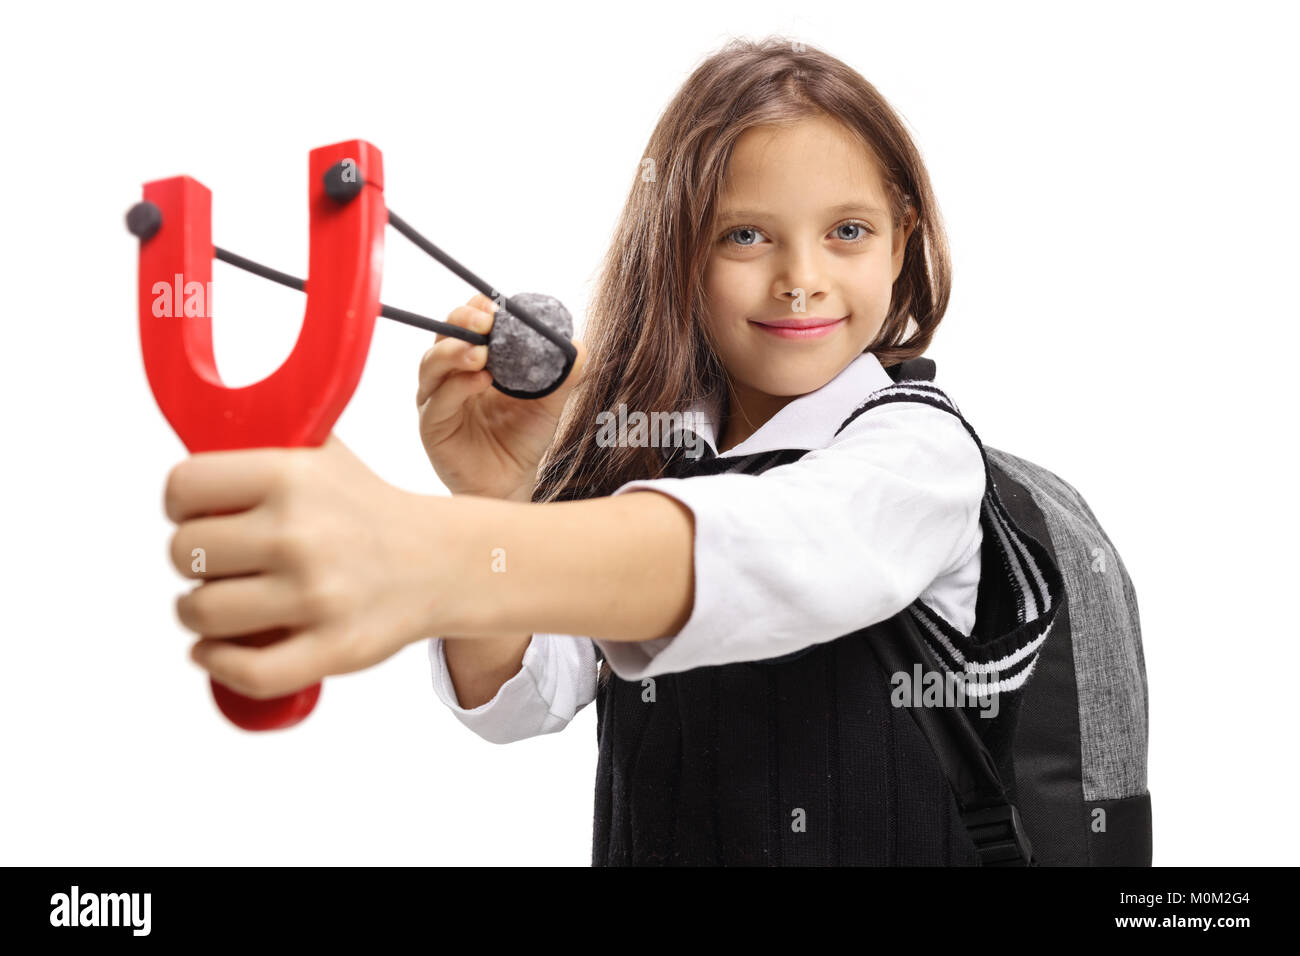 Little schoolgirl aiming with a slingshot and a stone and smiling isolated on white background Stock Photo